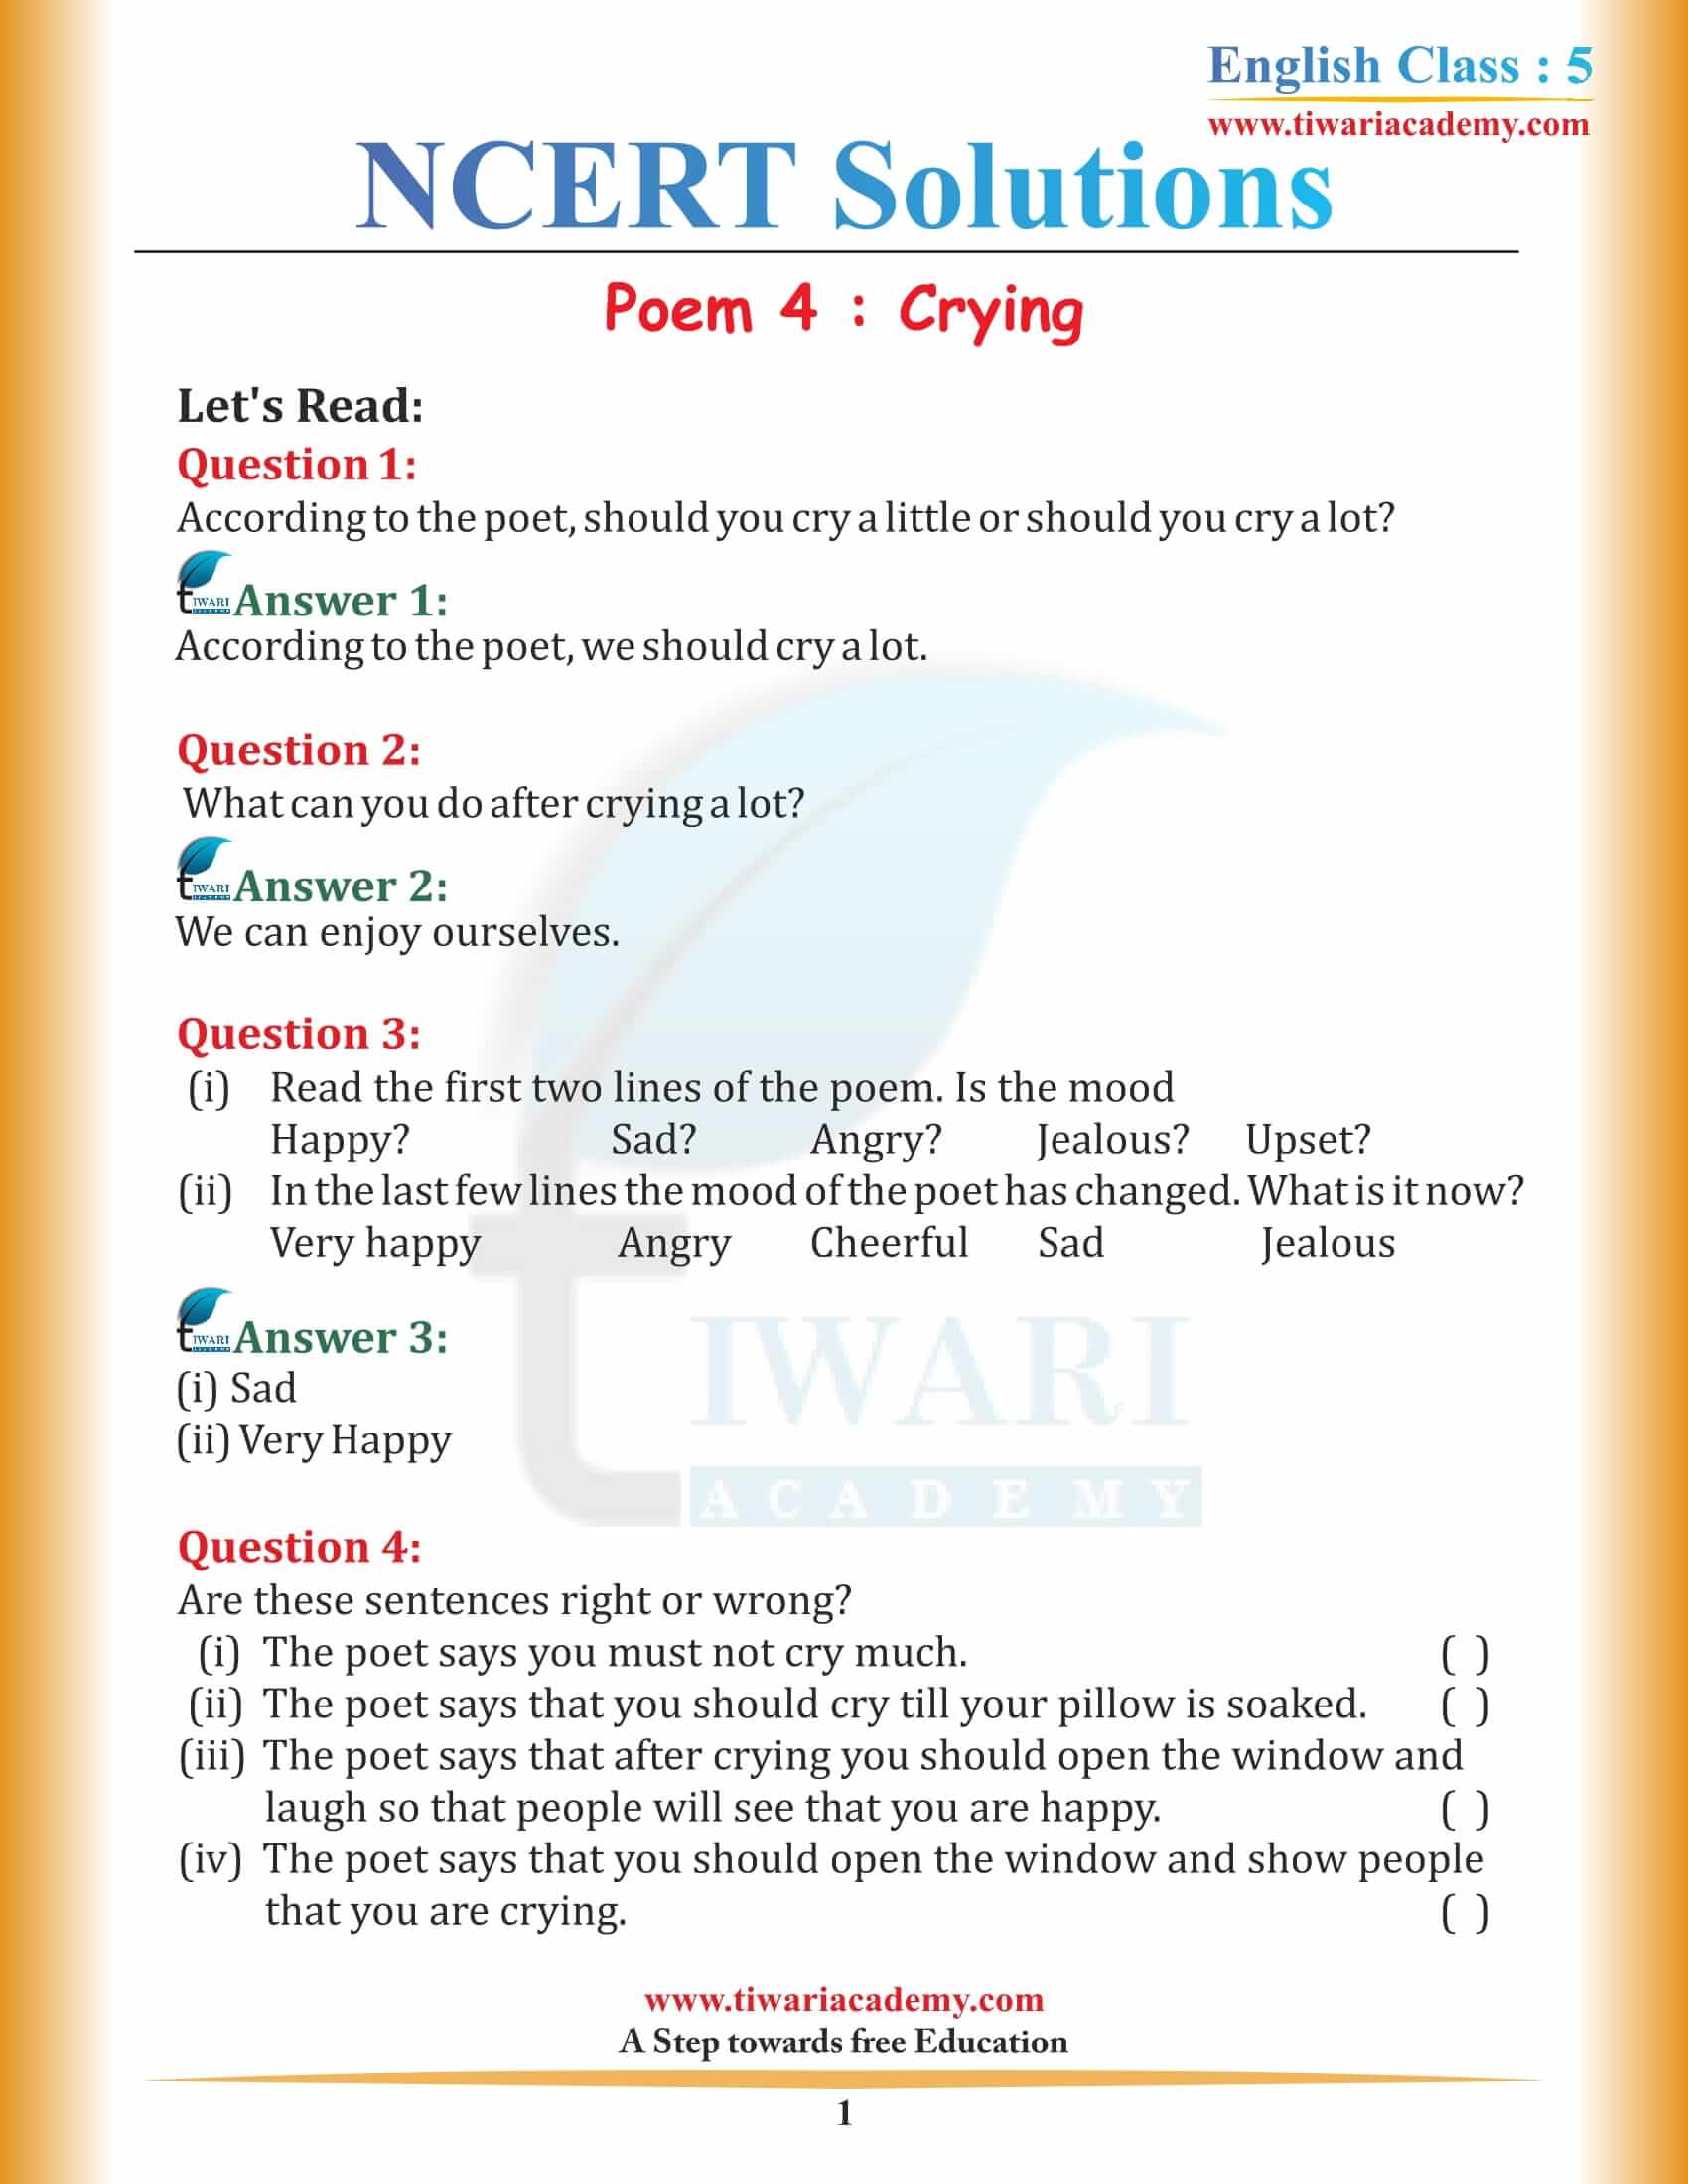 NCERT Solutions for Class 5 English Chapter 4 Crying